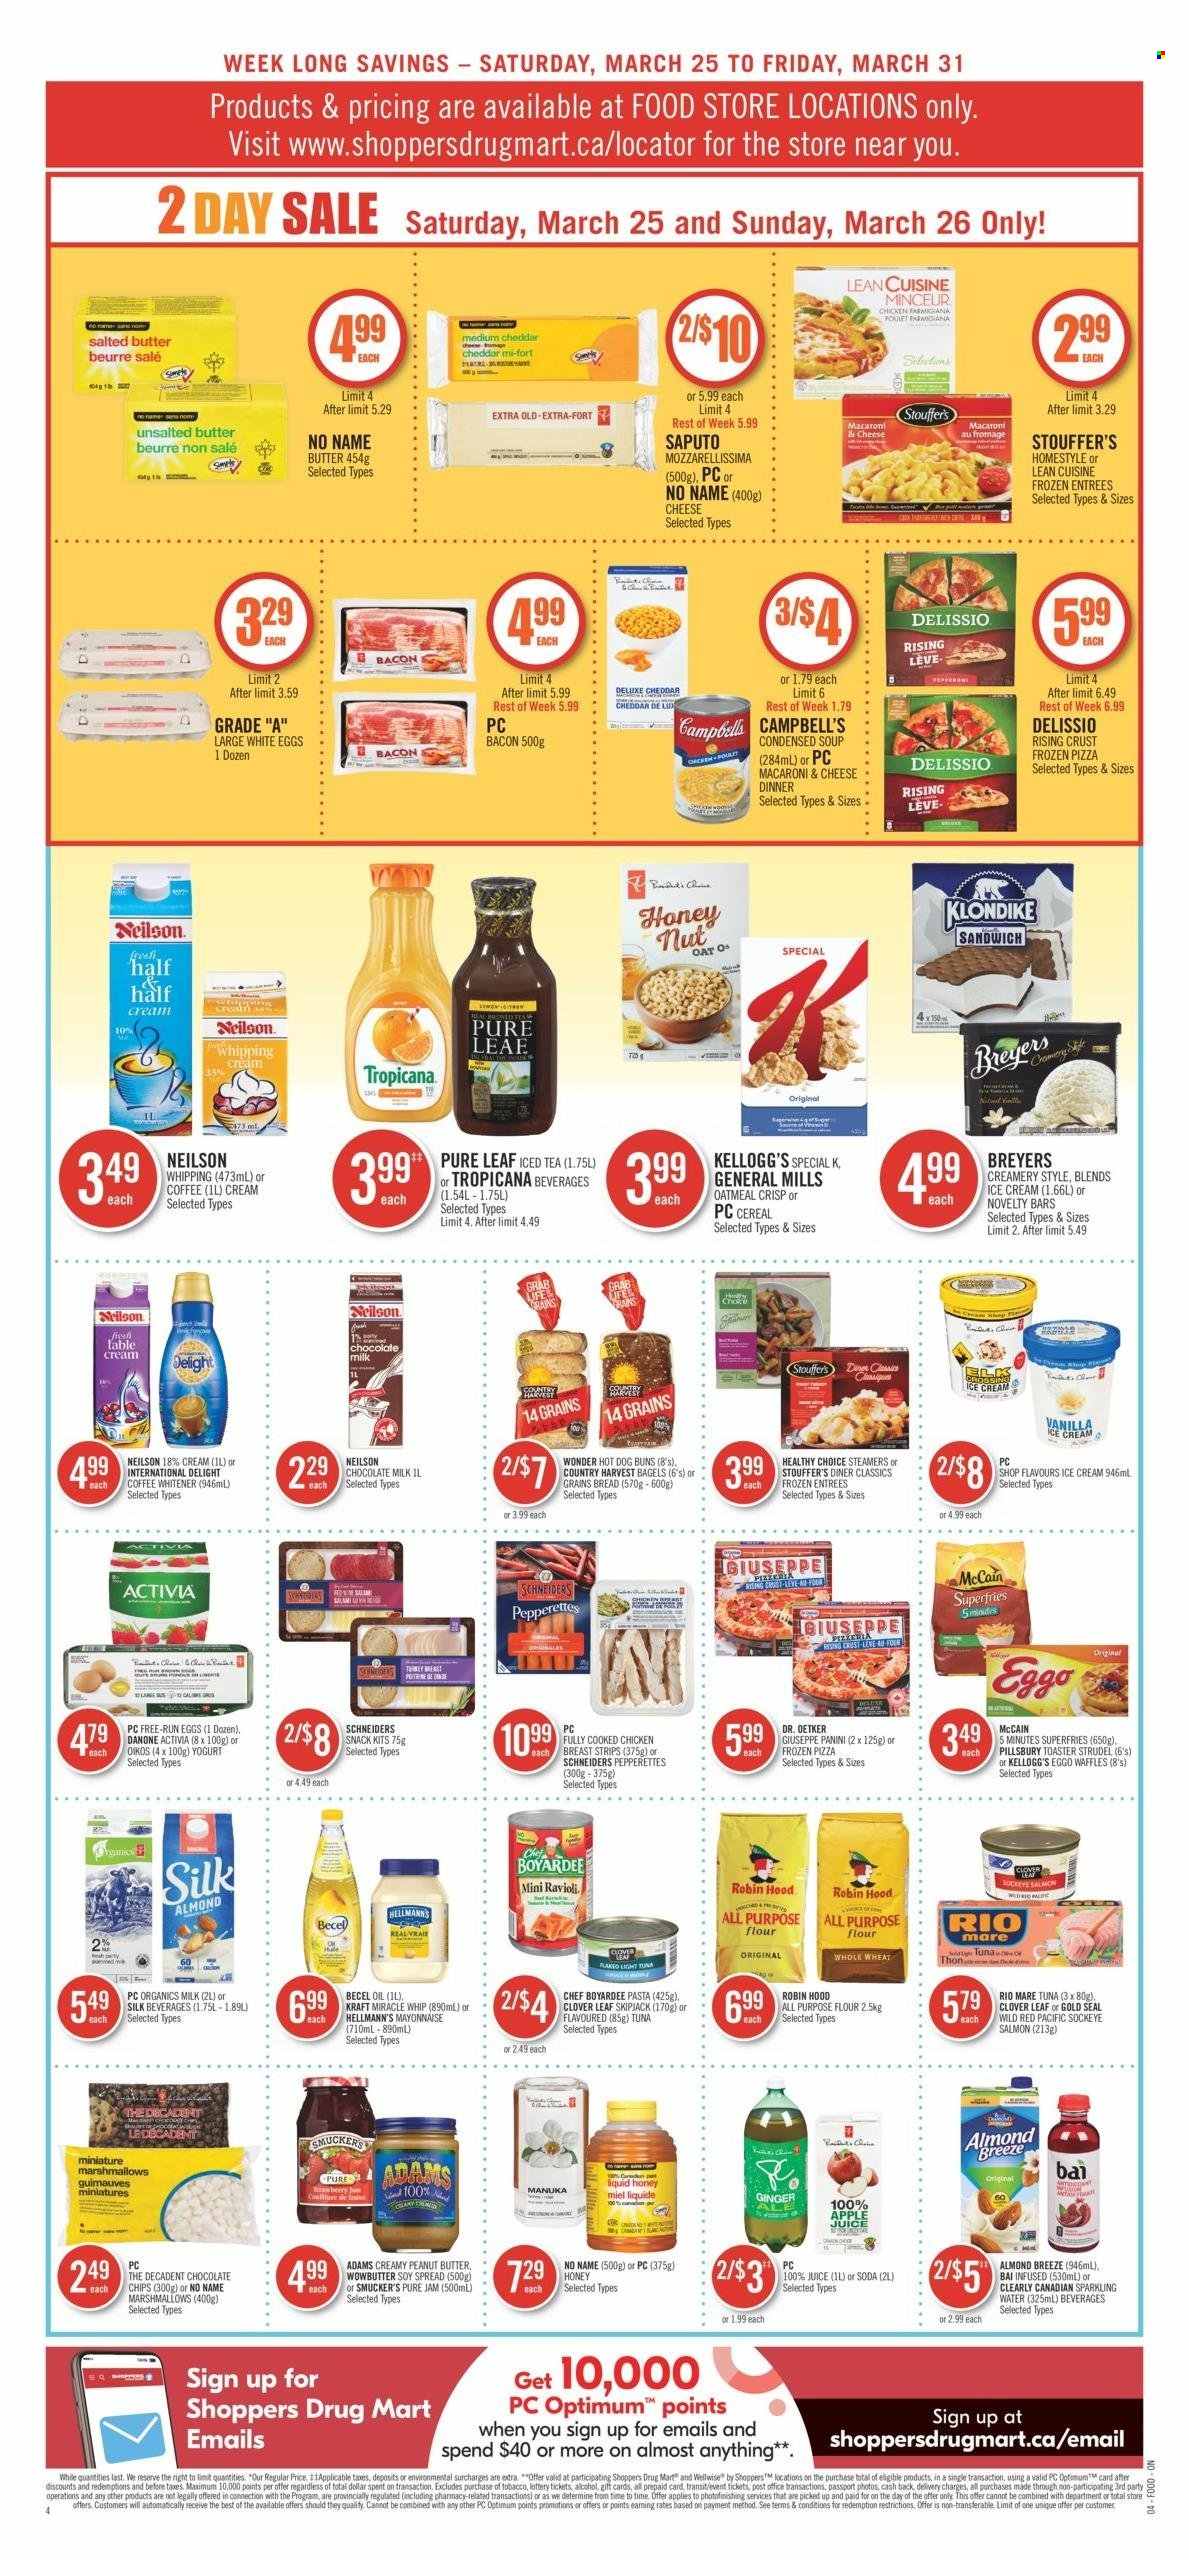 thumbnail - Shoppers Drug Mart Flyer - March 25, 2023 - March 31, 2023 - Sales products - bagels, bread, panini, strudel, buns, salmon, squid, tuna, No Name, Campbell's, macaroni & cheese, ravioli, pizza, sandwich, condensed soup, soup, pasta, Pillsbury, instant soup, Lean Cuisine, Healthy Choice, Kraft®, bacon, Dr. Oetker, yoghurt, Clover, Activia, Oikos, organic milk, Almond Breeze, eggs, salted butter, whipping cream, coffee whitener, mayonnaise, Miracle Whip, Hellmann’s, ice cream, Stouffer's, marshmallows, milk chocolate, snack, macaroons, Kellogg's, waffles, all purpose flour, flour, oatmeal, oats, light tuna, Chef Boyardee, cereals, ginger, oil, fruit jam, peanut butter, apple juice, juice, ice tea, Bai, soda, sparkling water, water, Pure Leaf, Optimum, alcohol, Danone. Page 4.